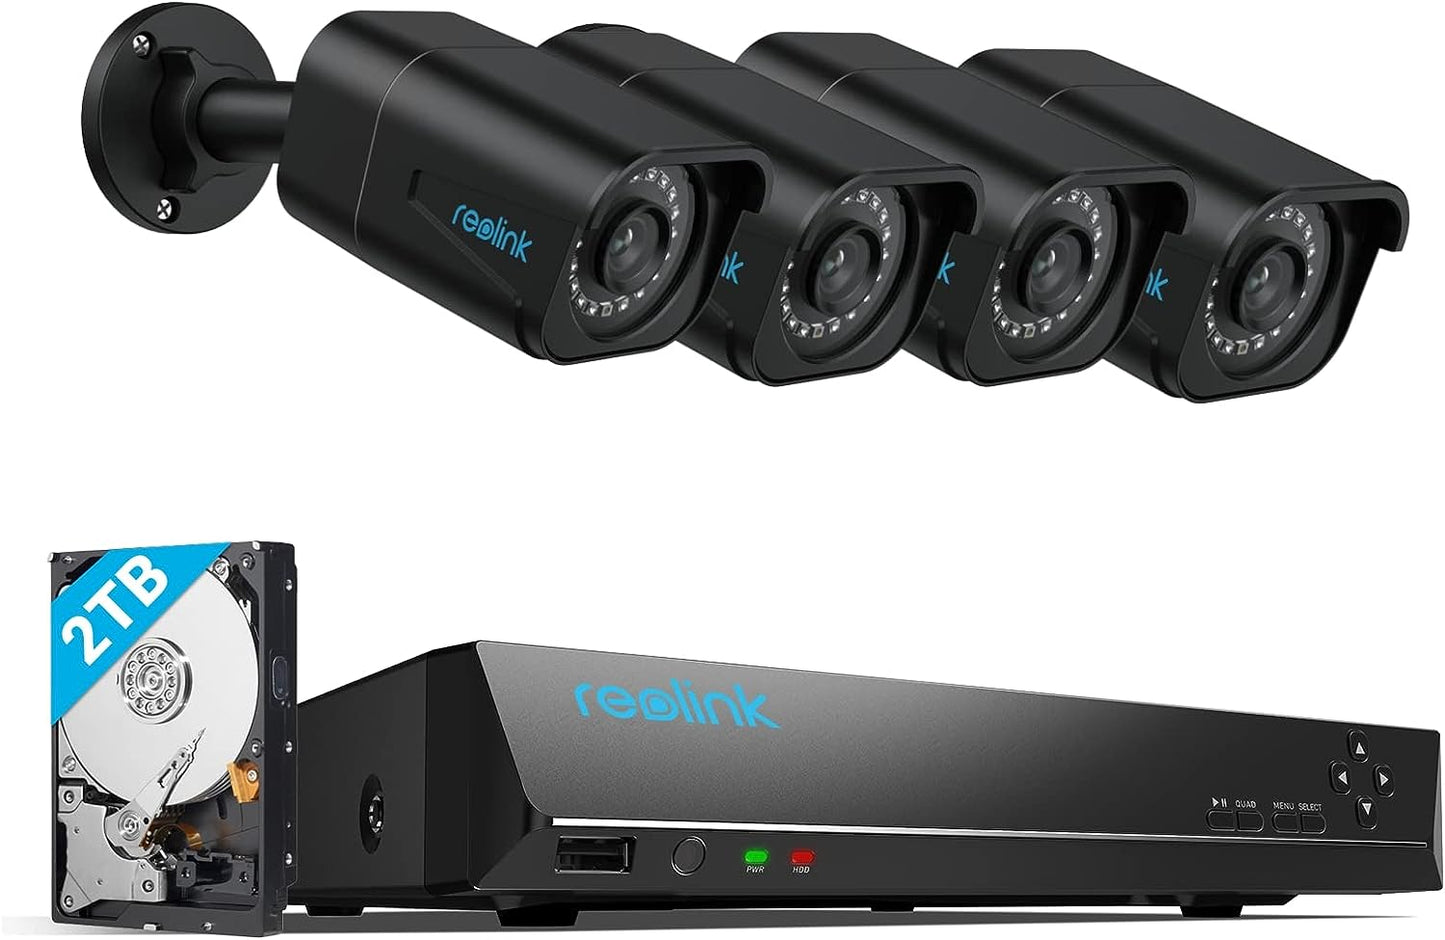 Reolink 4K PoE Security Camera Kit System H.265, 4pcs 8MP Person/Vehicle Detection Wired Outdoor PoE CCTV IP Cameras and 8CH NVR with 2TB HDD for 24/7 Recording Night Vision Audio, RLK8-800B4